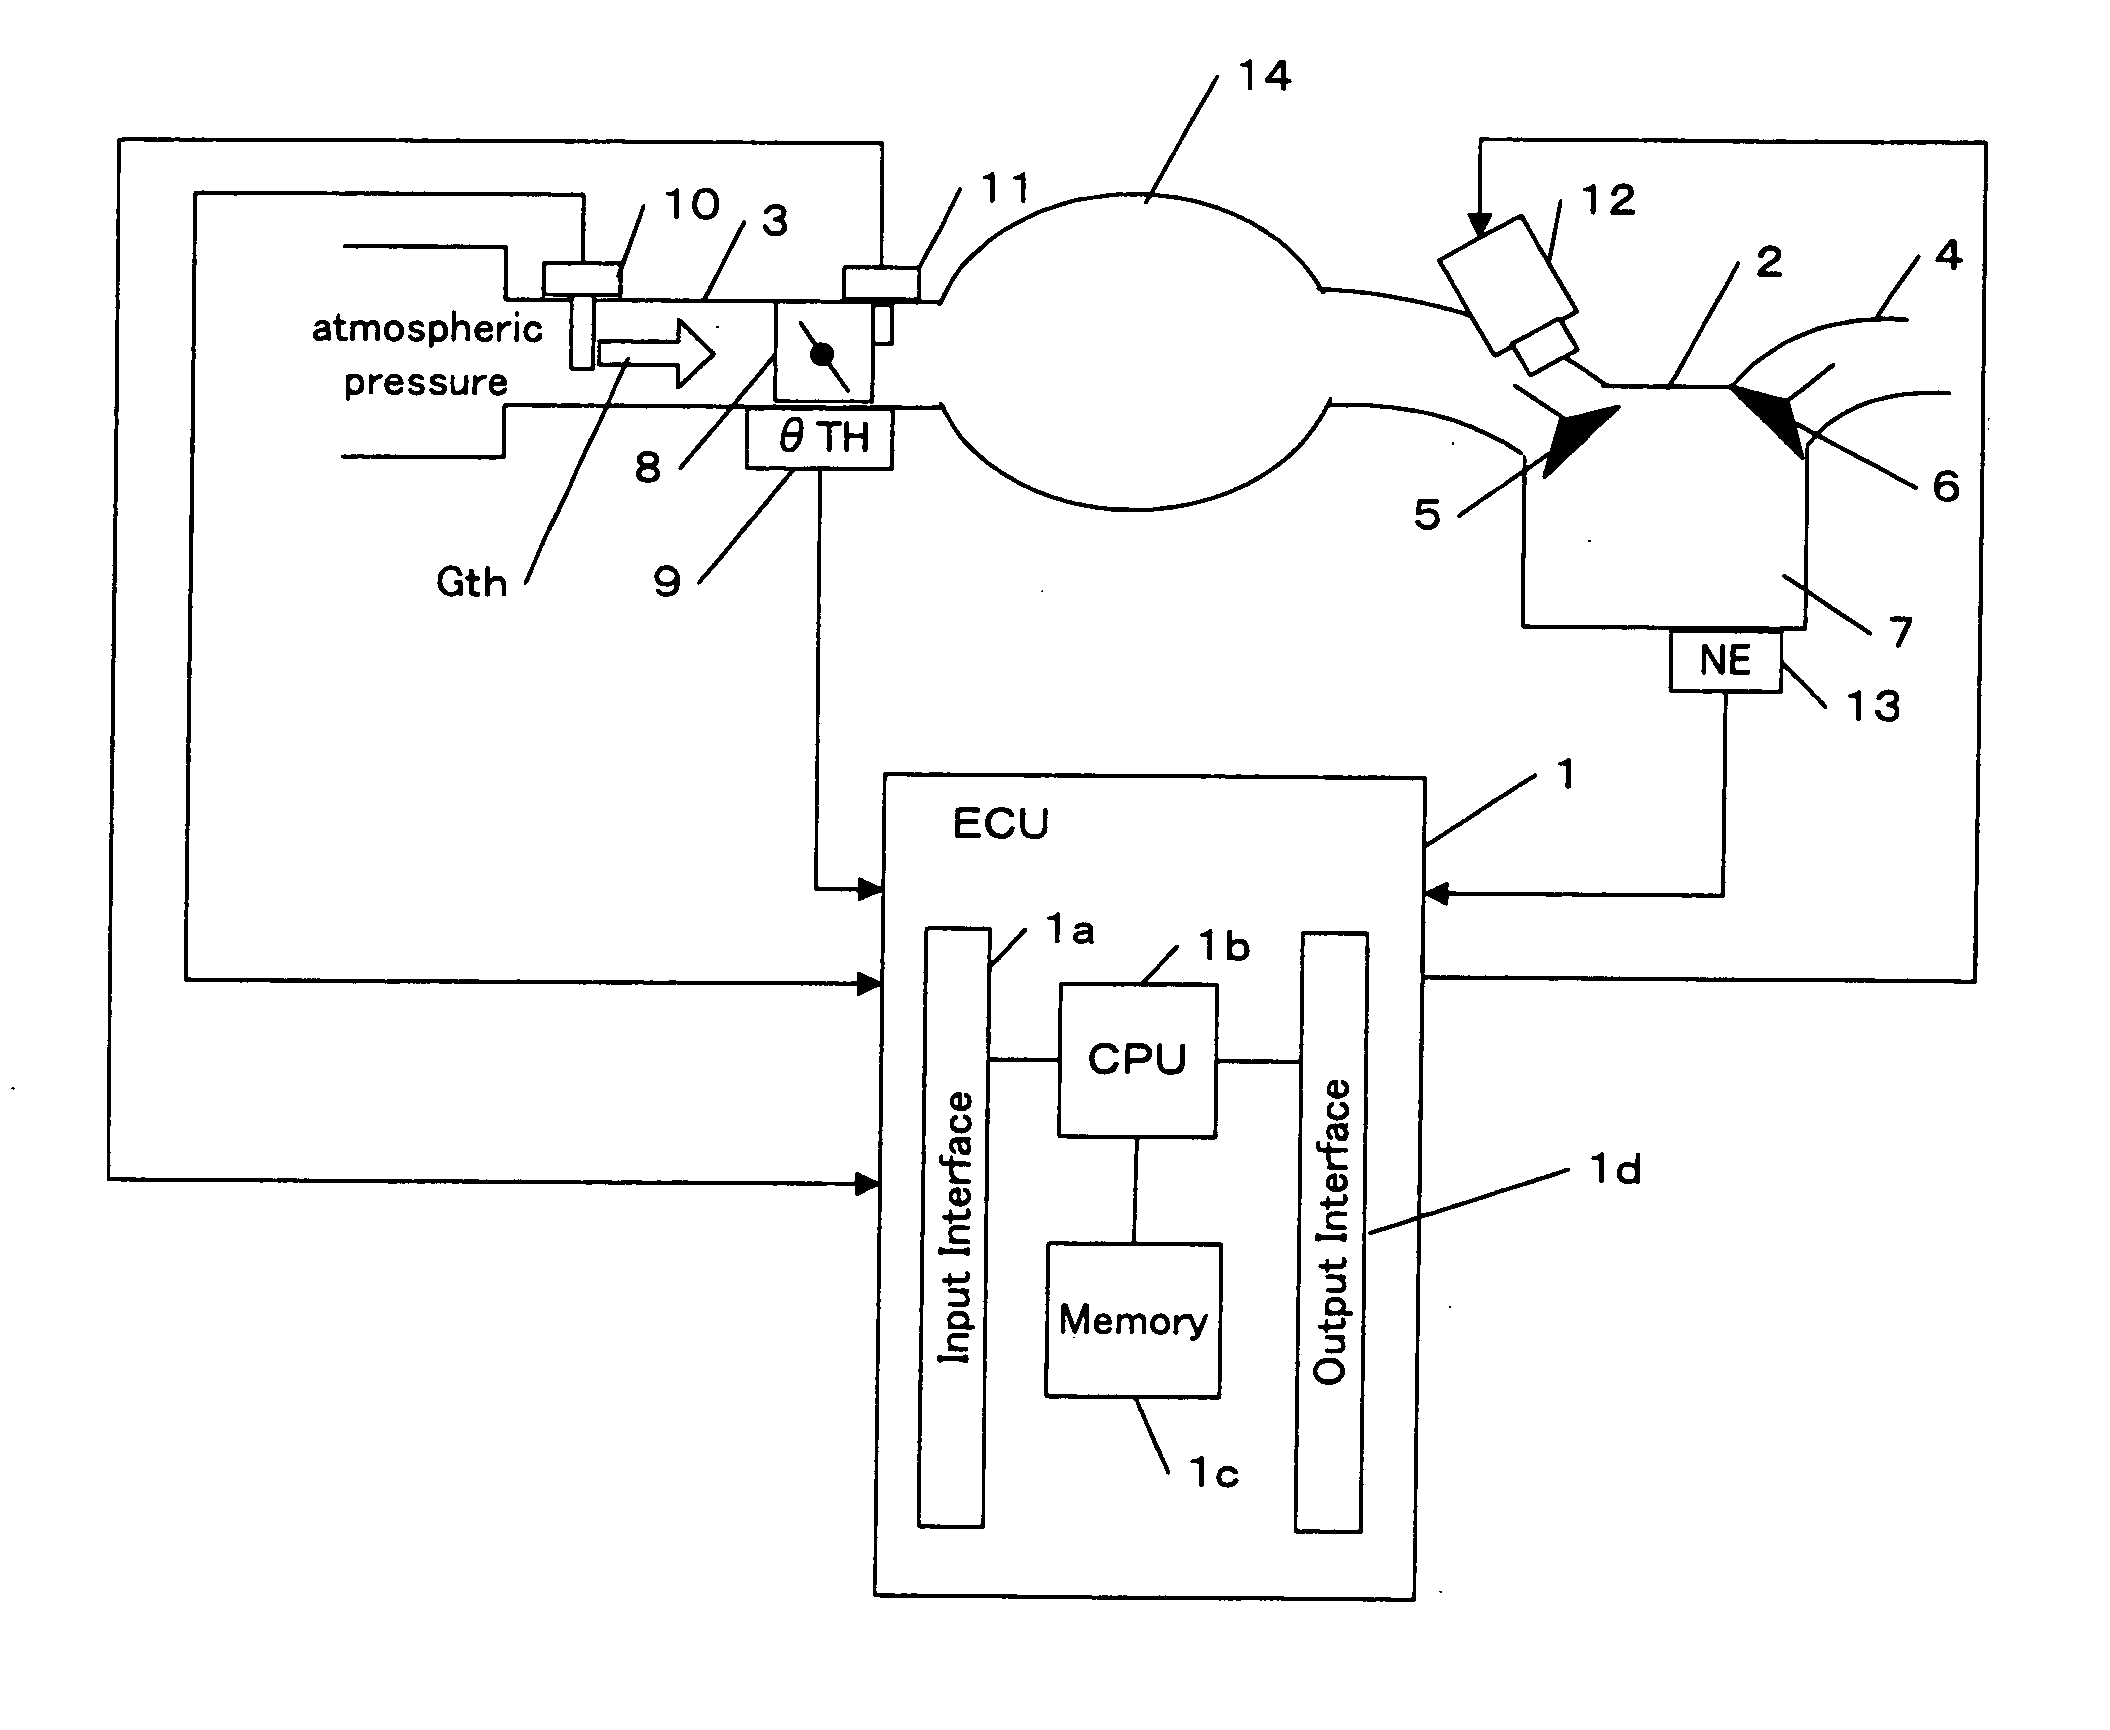 Controller for controlling a plant